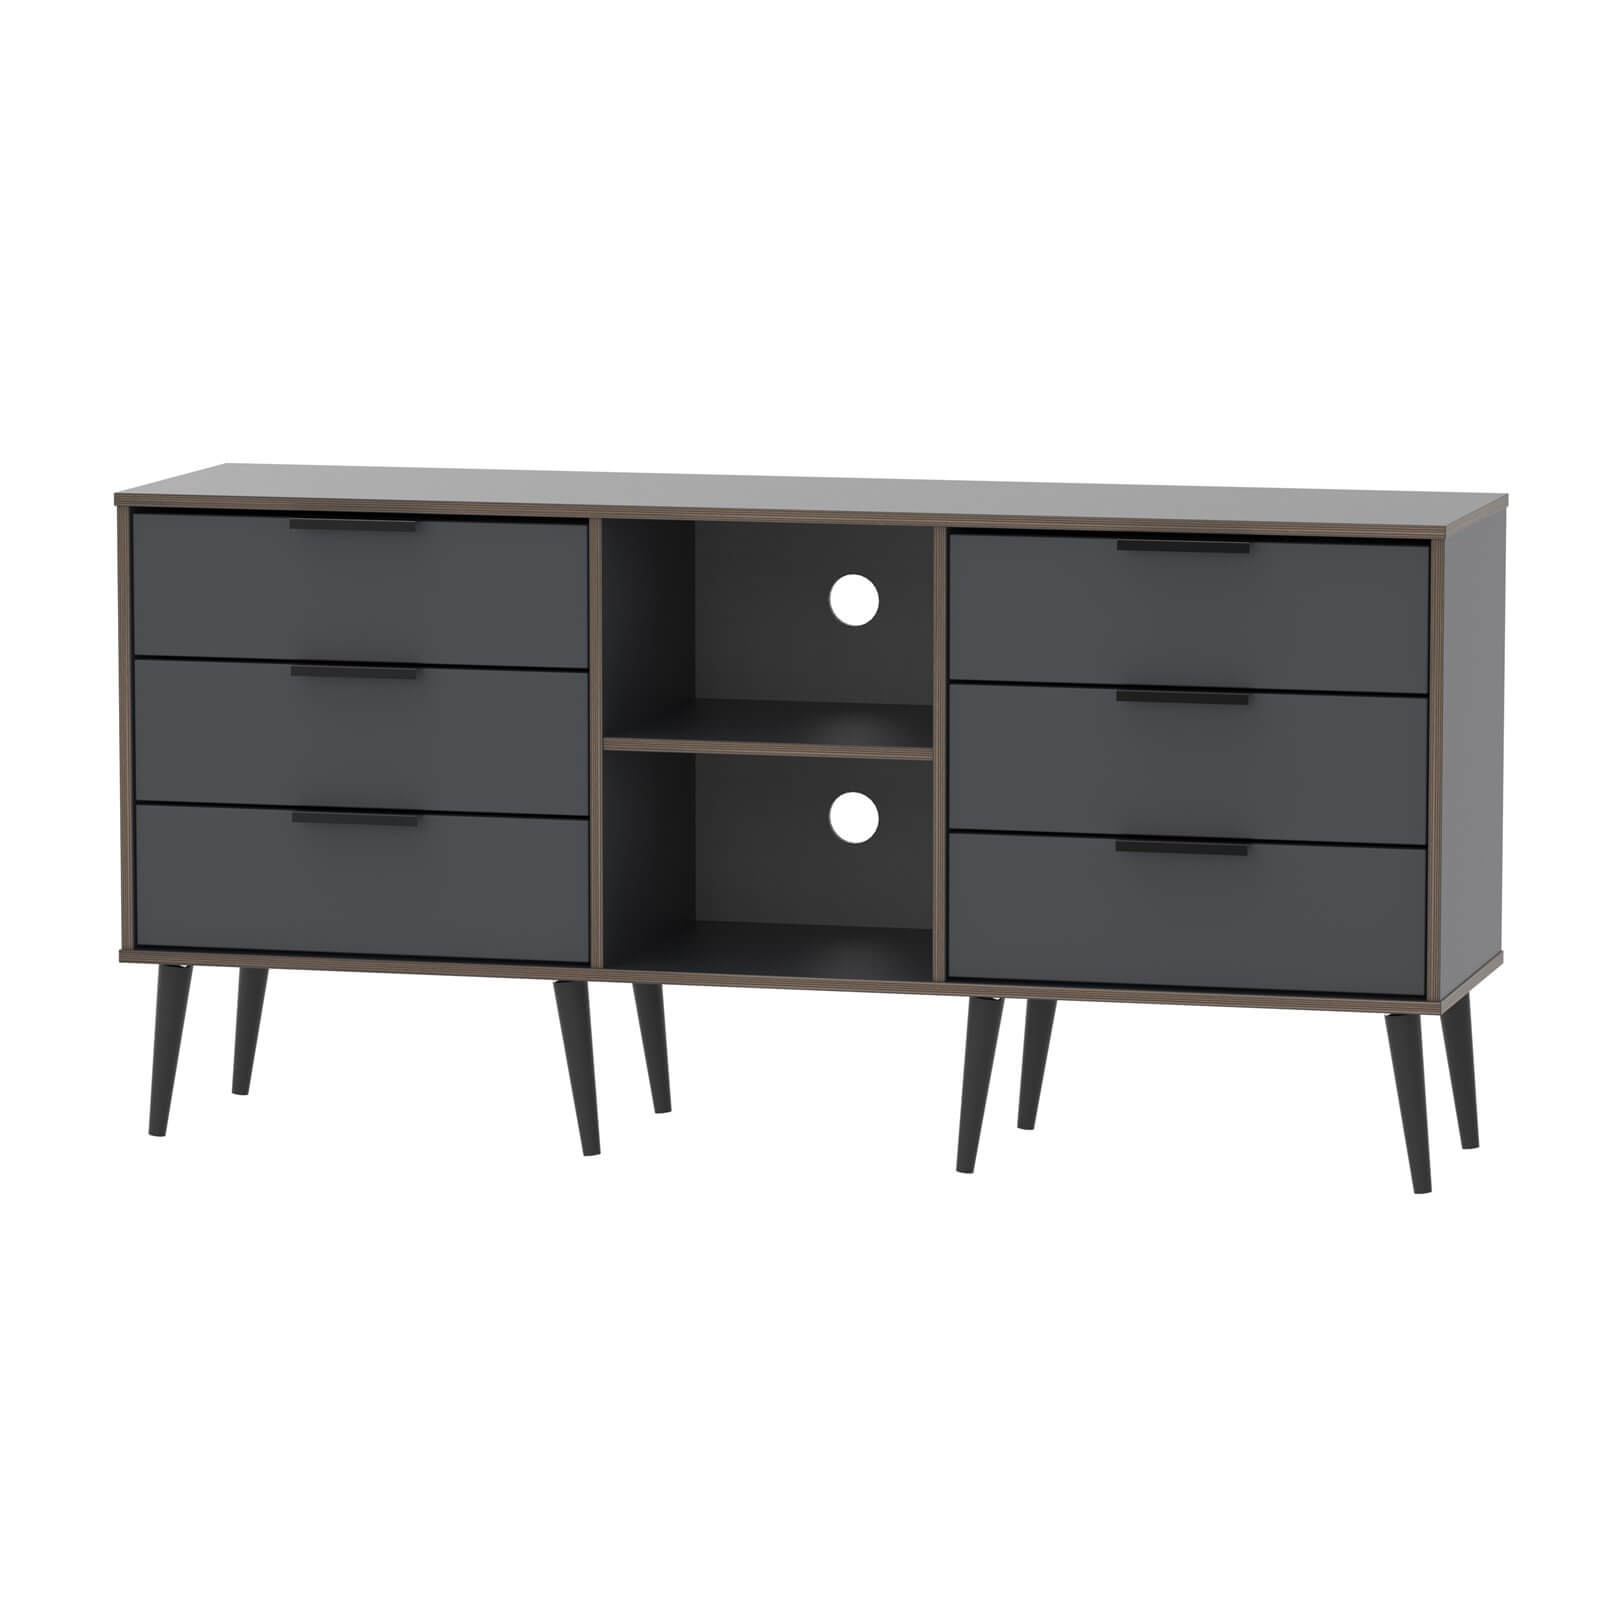 Tokyo 6 Drawer TV Unit with Legs - Graphite